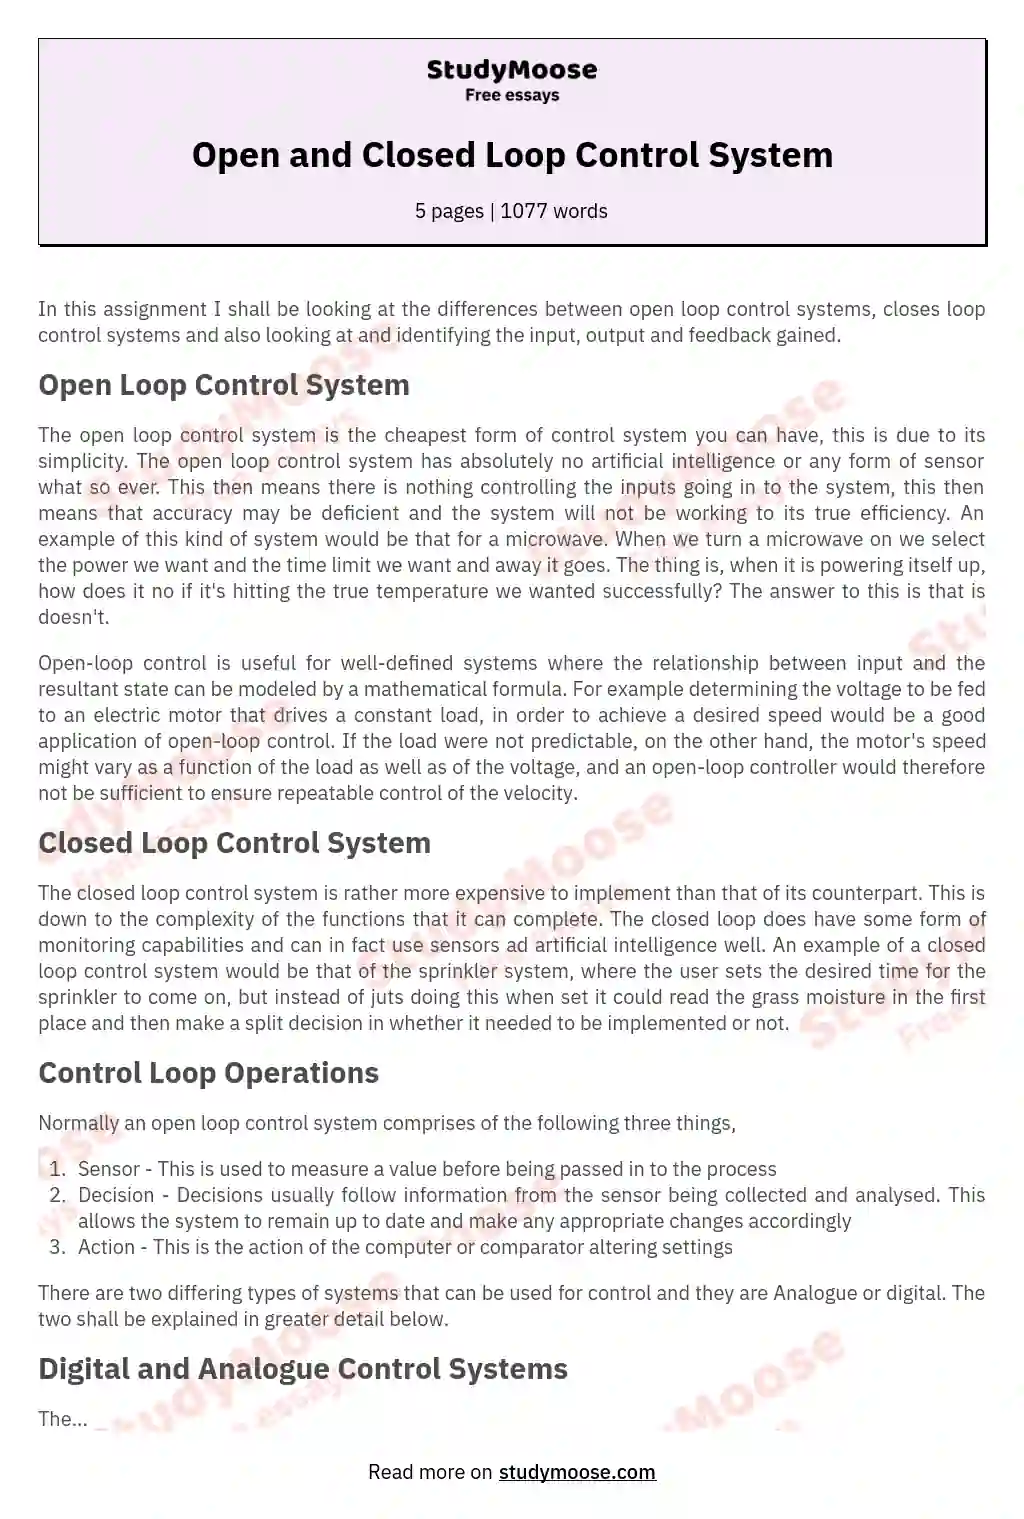 Open and Closed Loop Control System essay